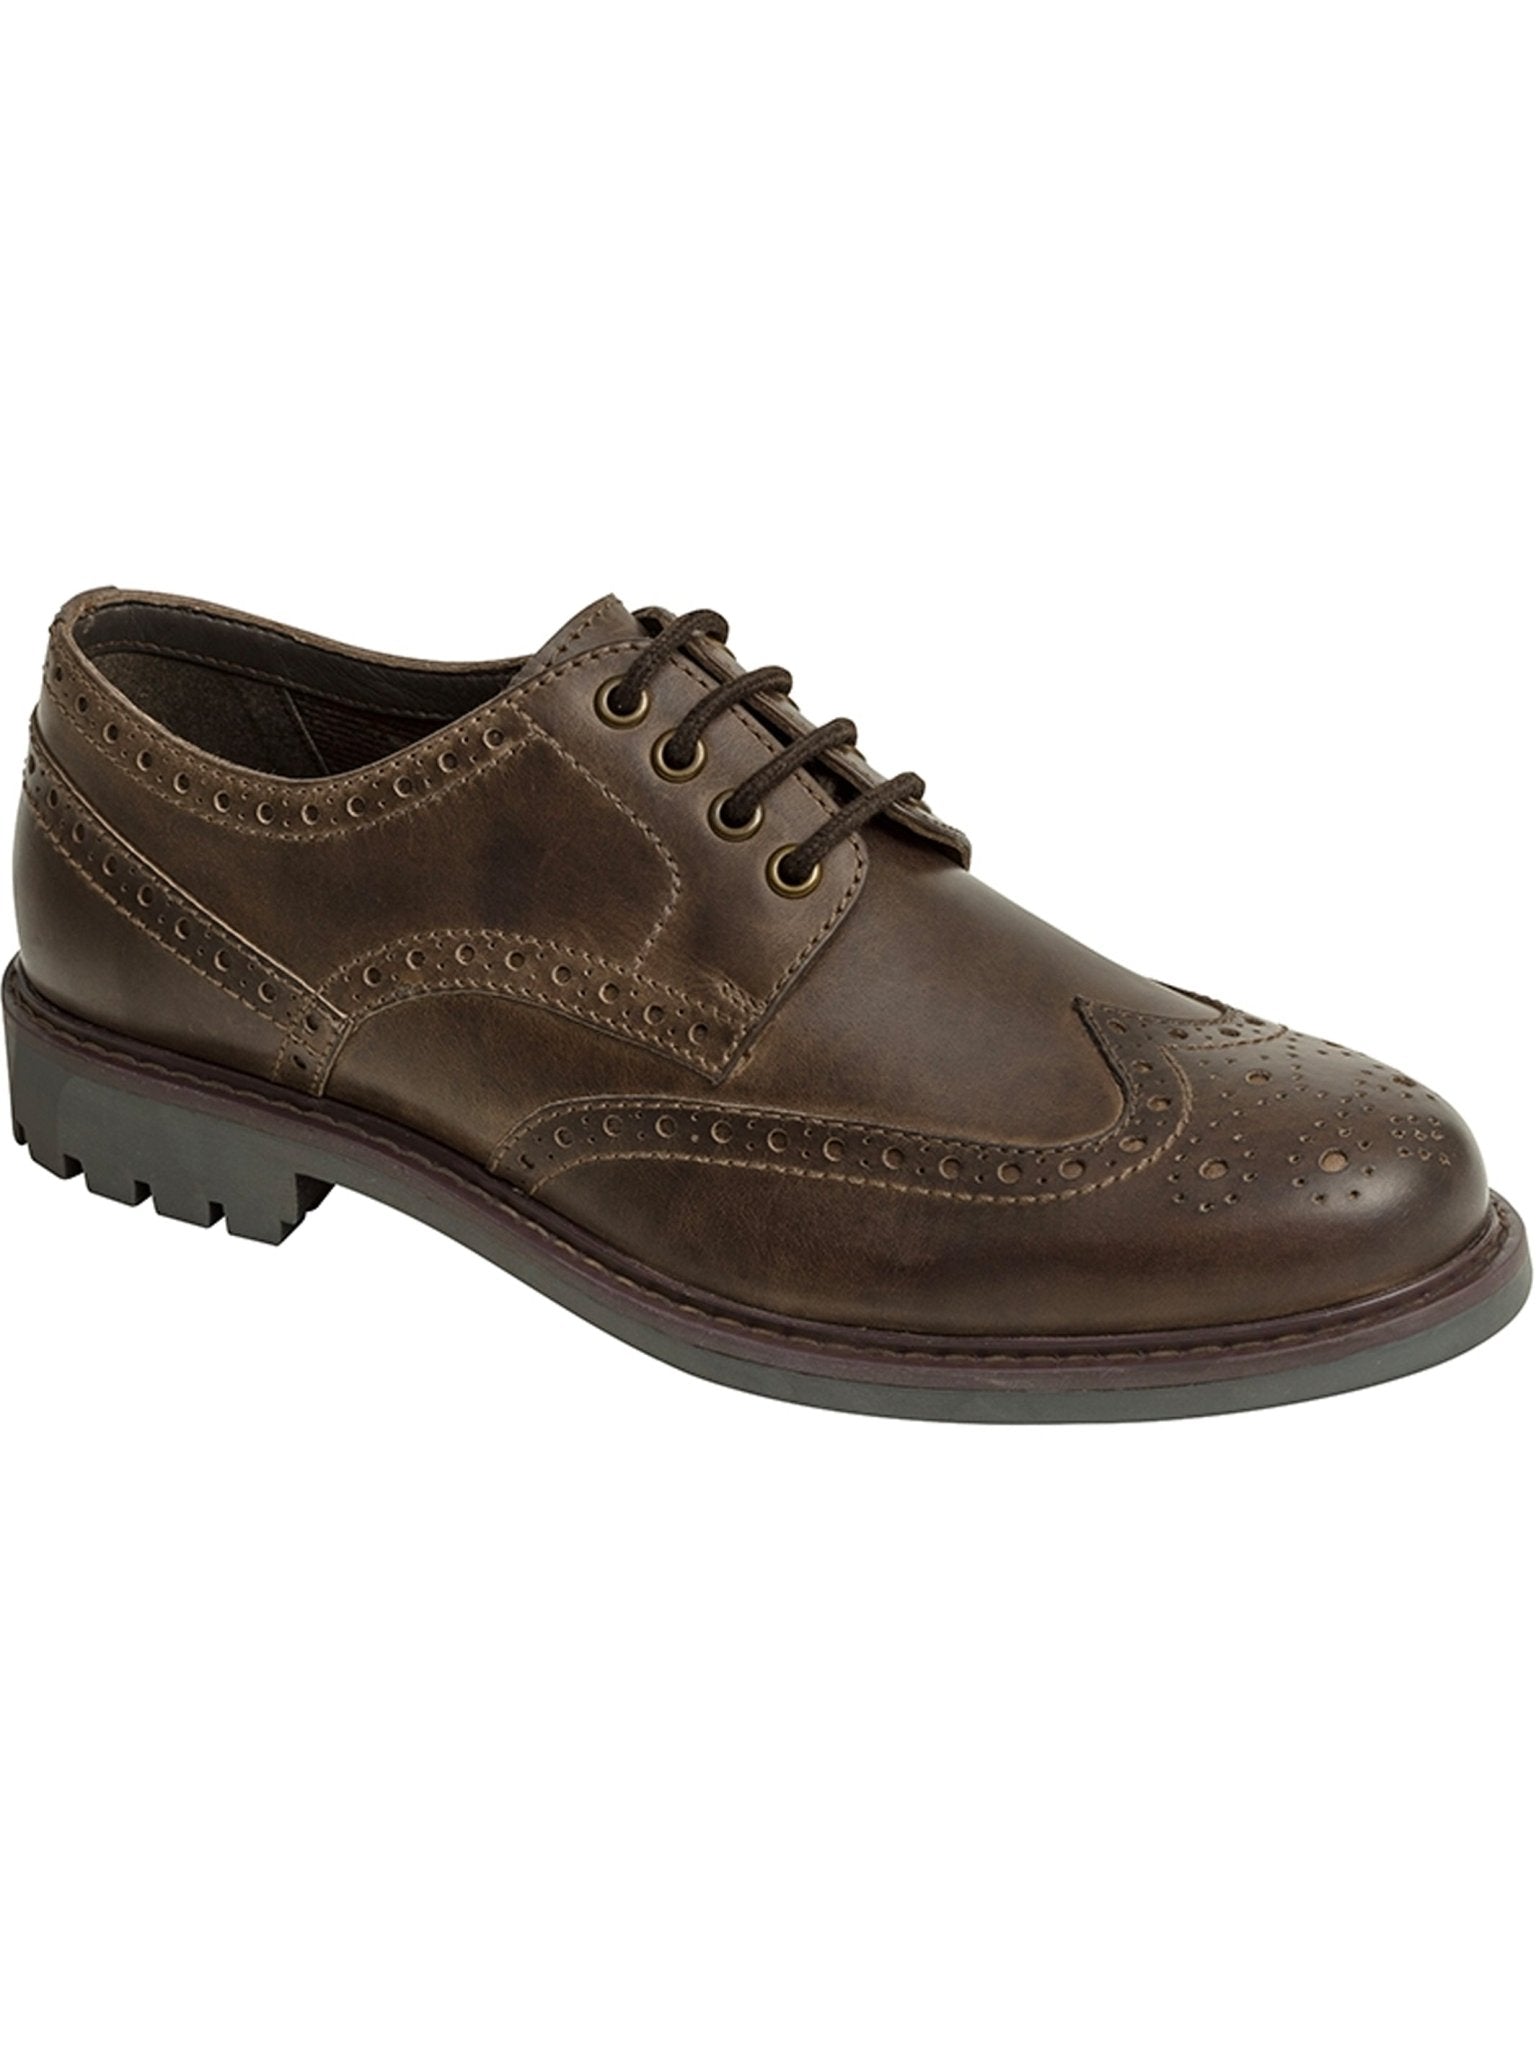 4elementsclothingHoggs of FifeHoggs of Fife - Mens Brogue Shoe - Inverurie Country Brogue Full grain leather shoeShoes4230/BR/40